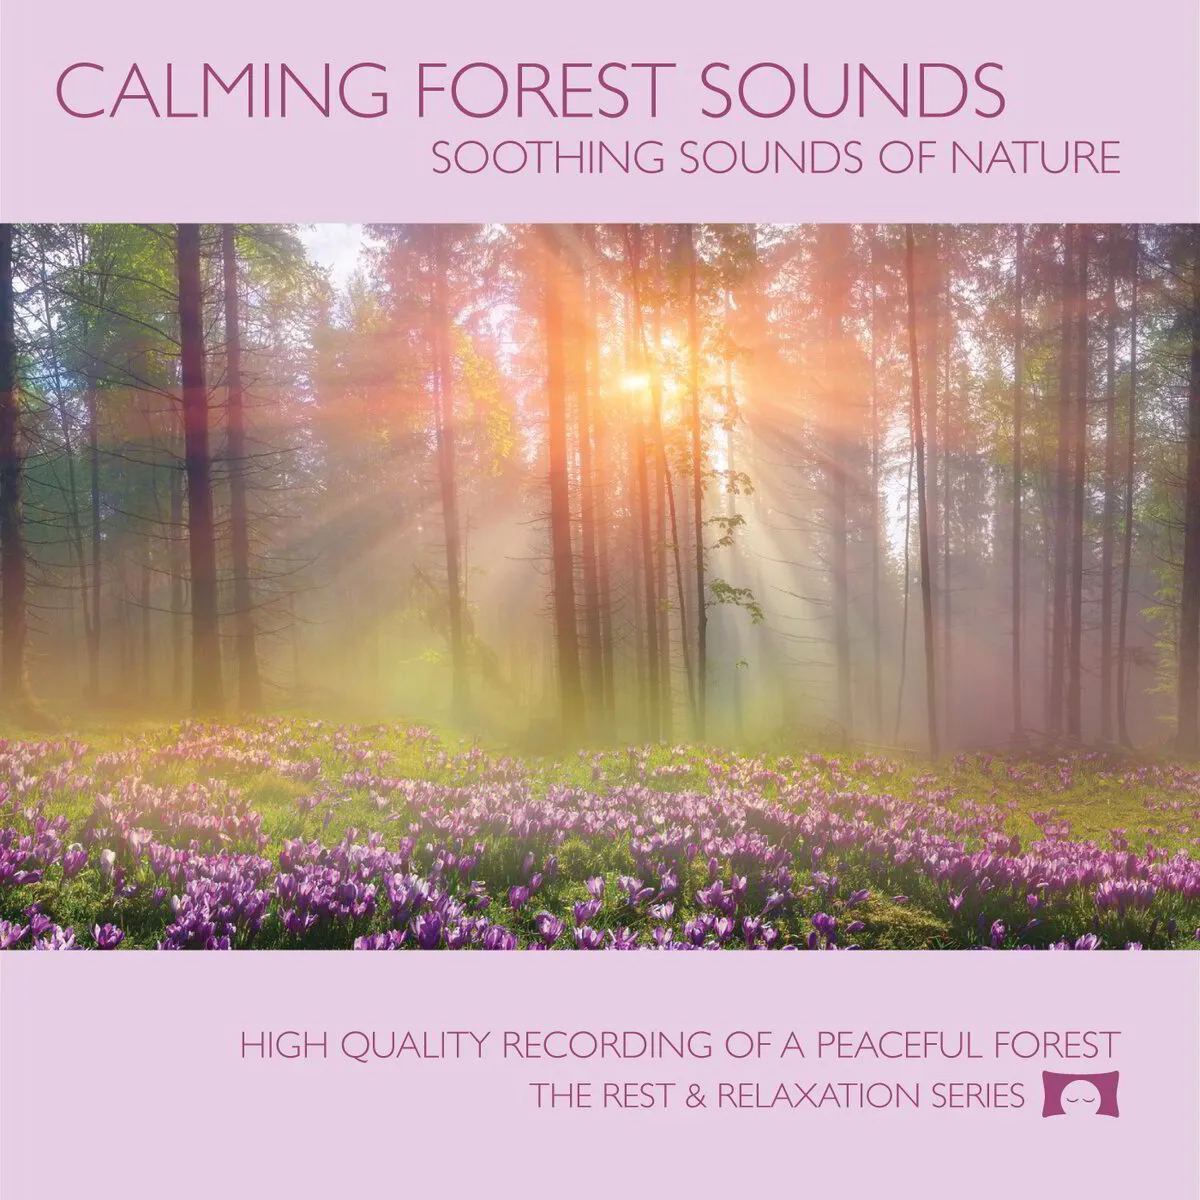 Calming Forest Sounds - Nature Sound Recording - Digital Download